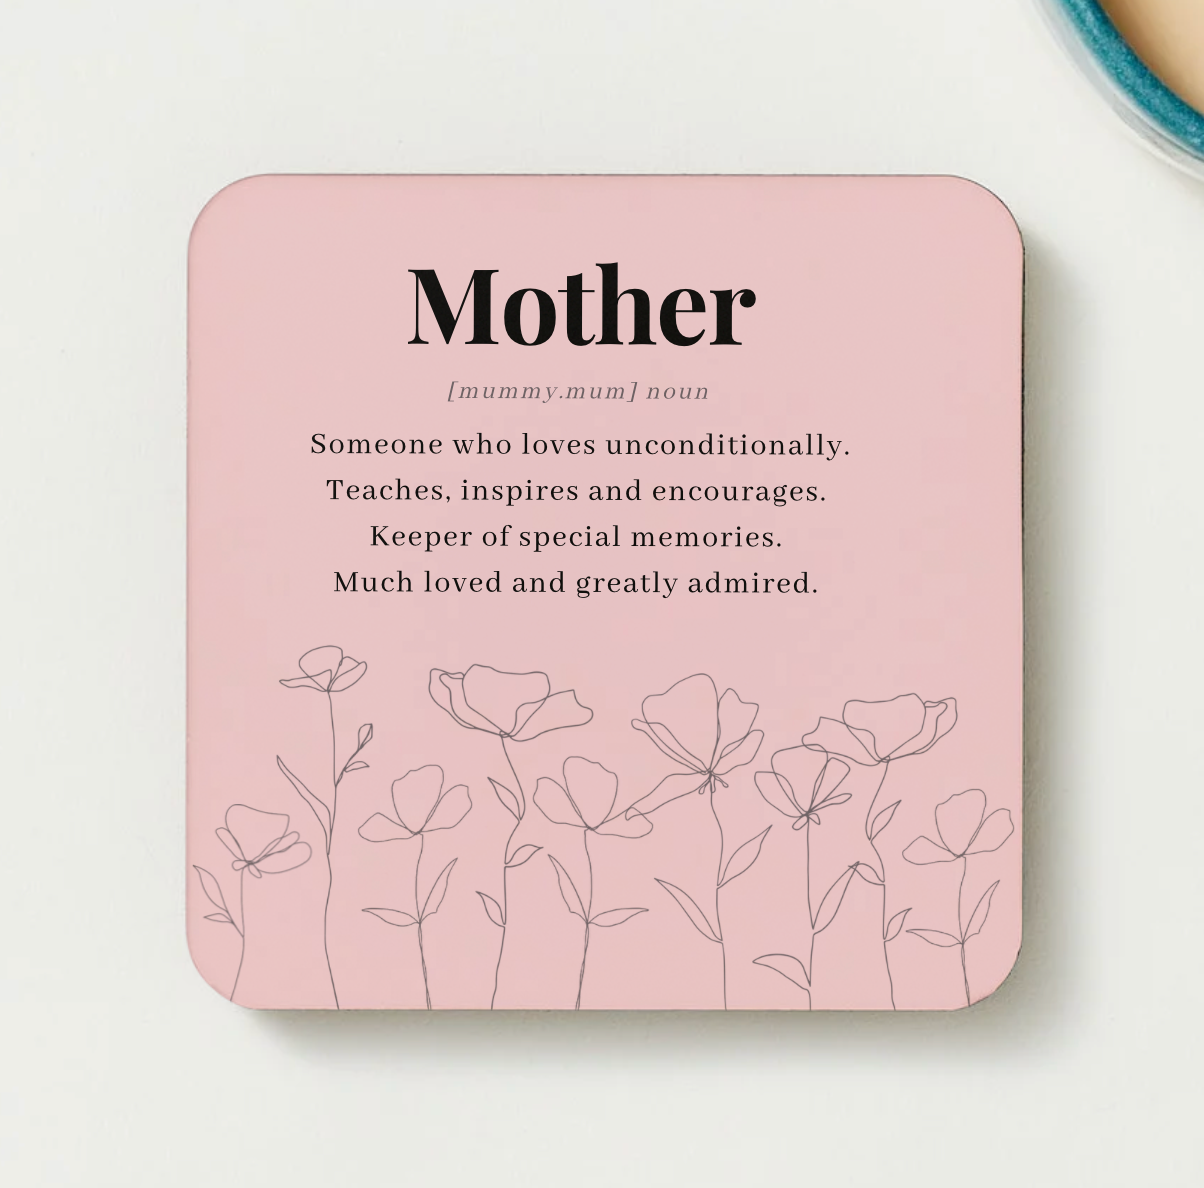 mother gift mother coaster coaster gift bath soaks mummy gift mummy coaster coaster gift bath soaks mum gift mum coaster coaster gift bath soaks